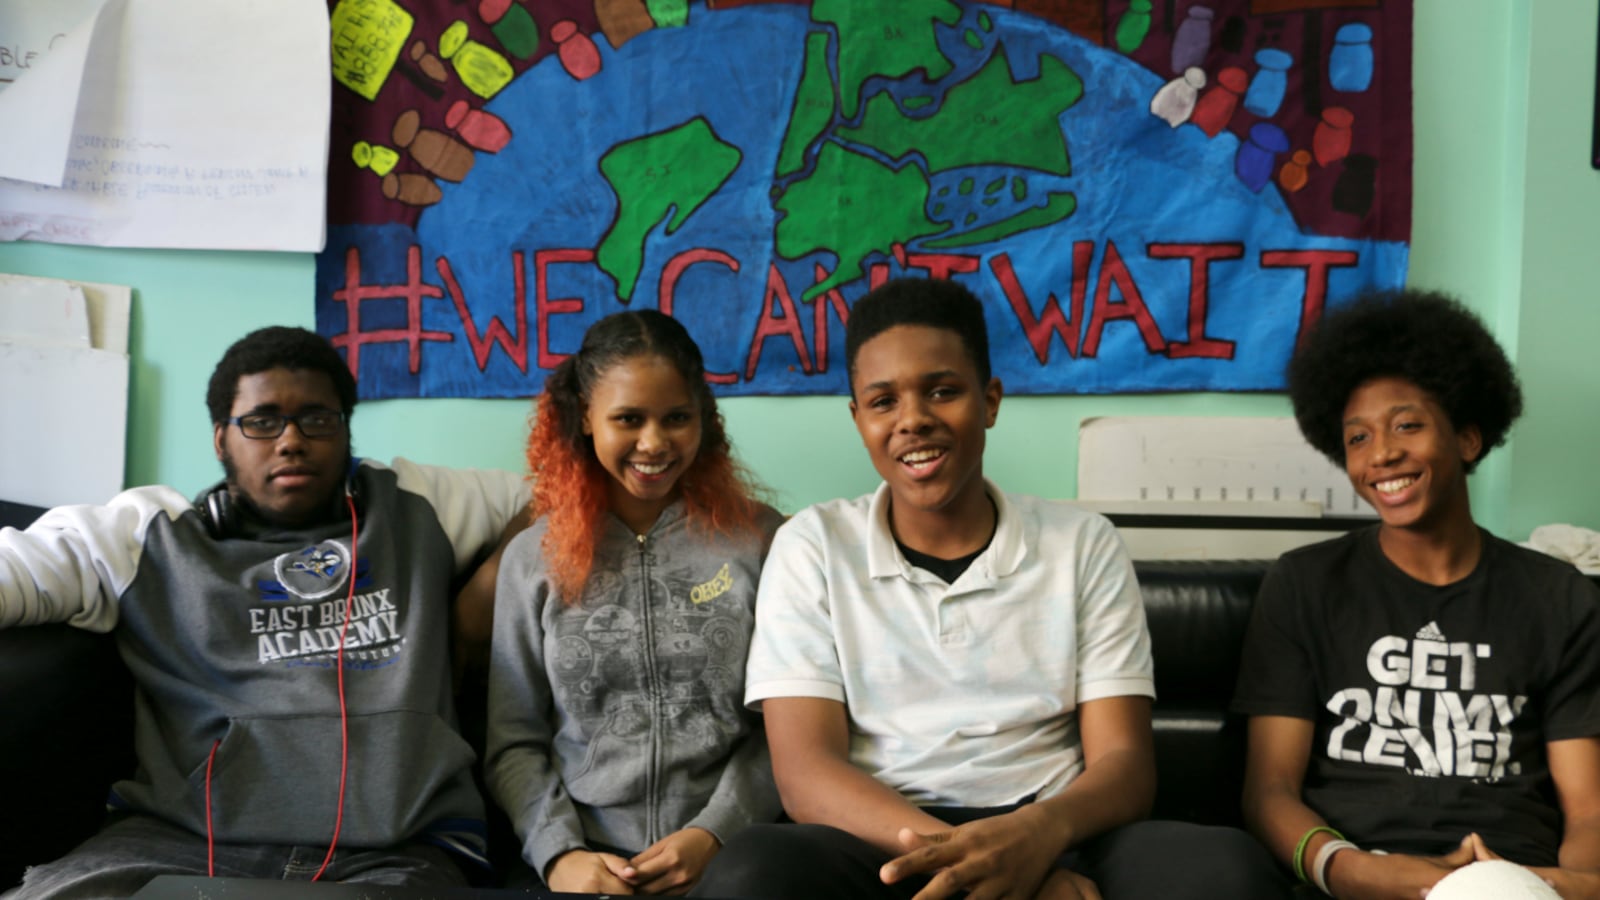 Student members of the advocacy group Urban Youth Collaborative explained why they support  a "restorative" approach to school discipline.